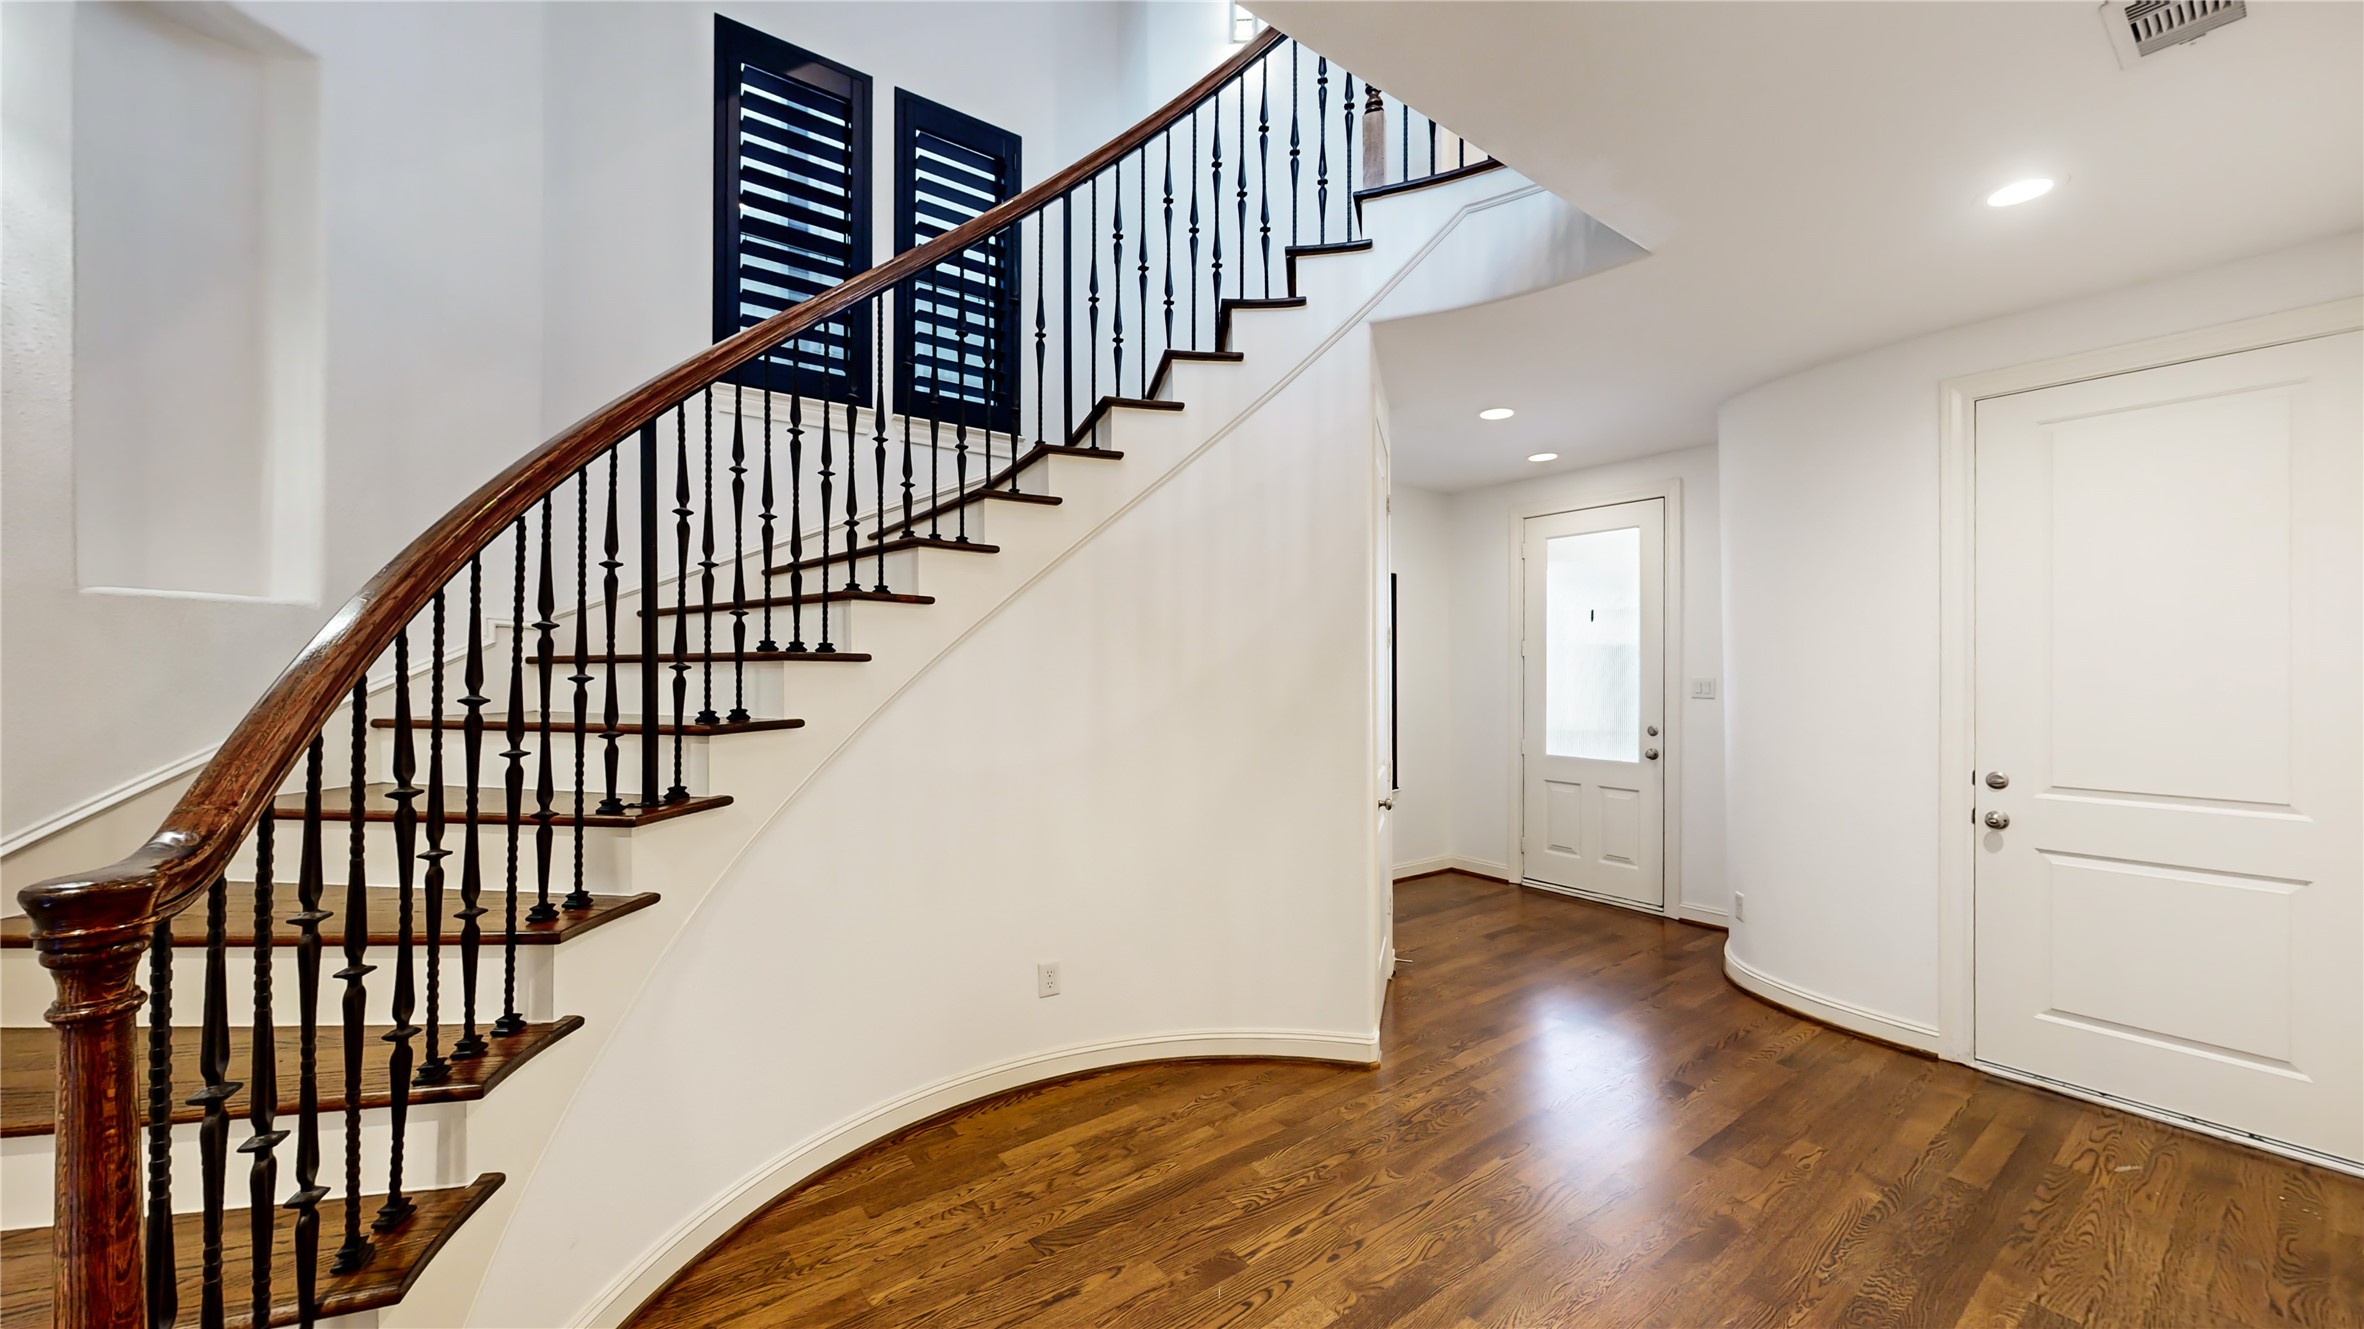 Beautiful hardwood flooring greets you as you enter into the impressive foyer with a stunning staircase.